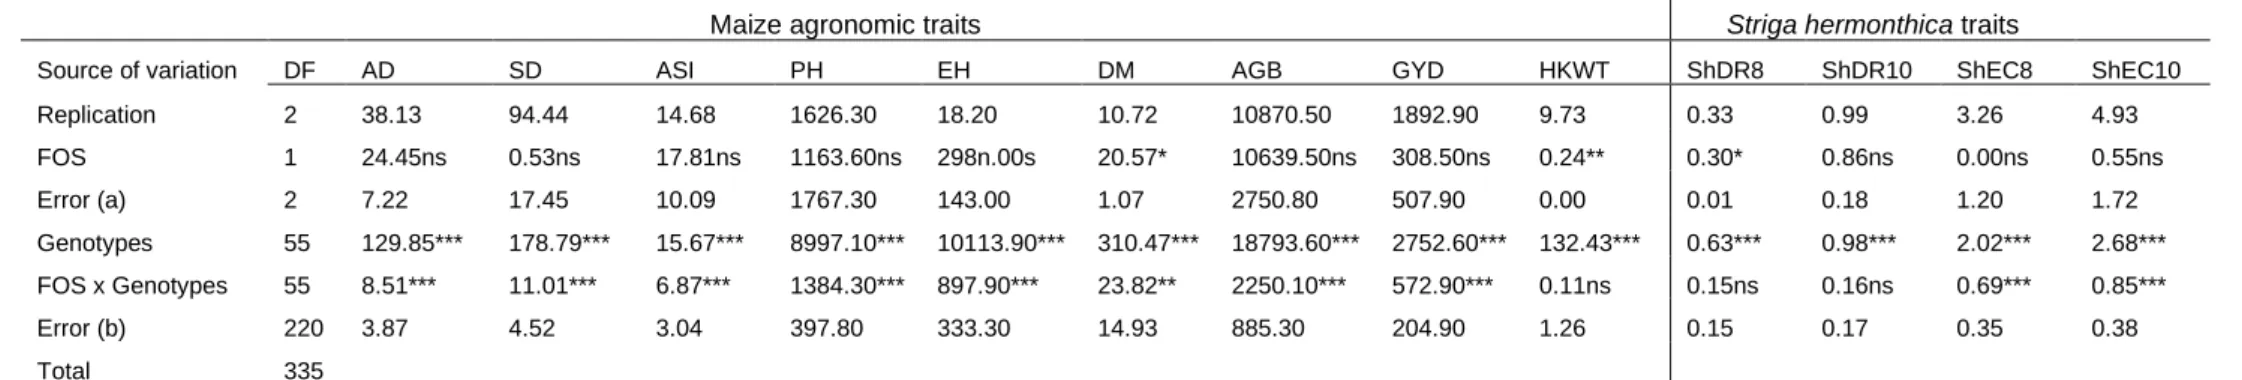 Table 3.2. Analysis of variance on maize and Striga traits recorded from 56 maize genotypes evaluated under S